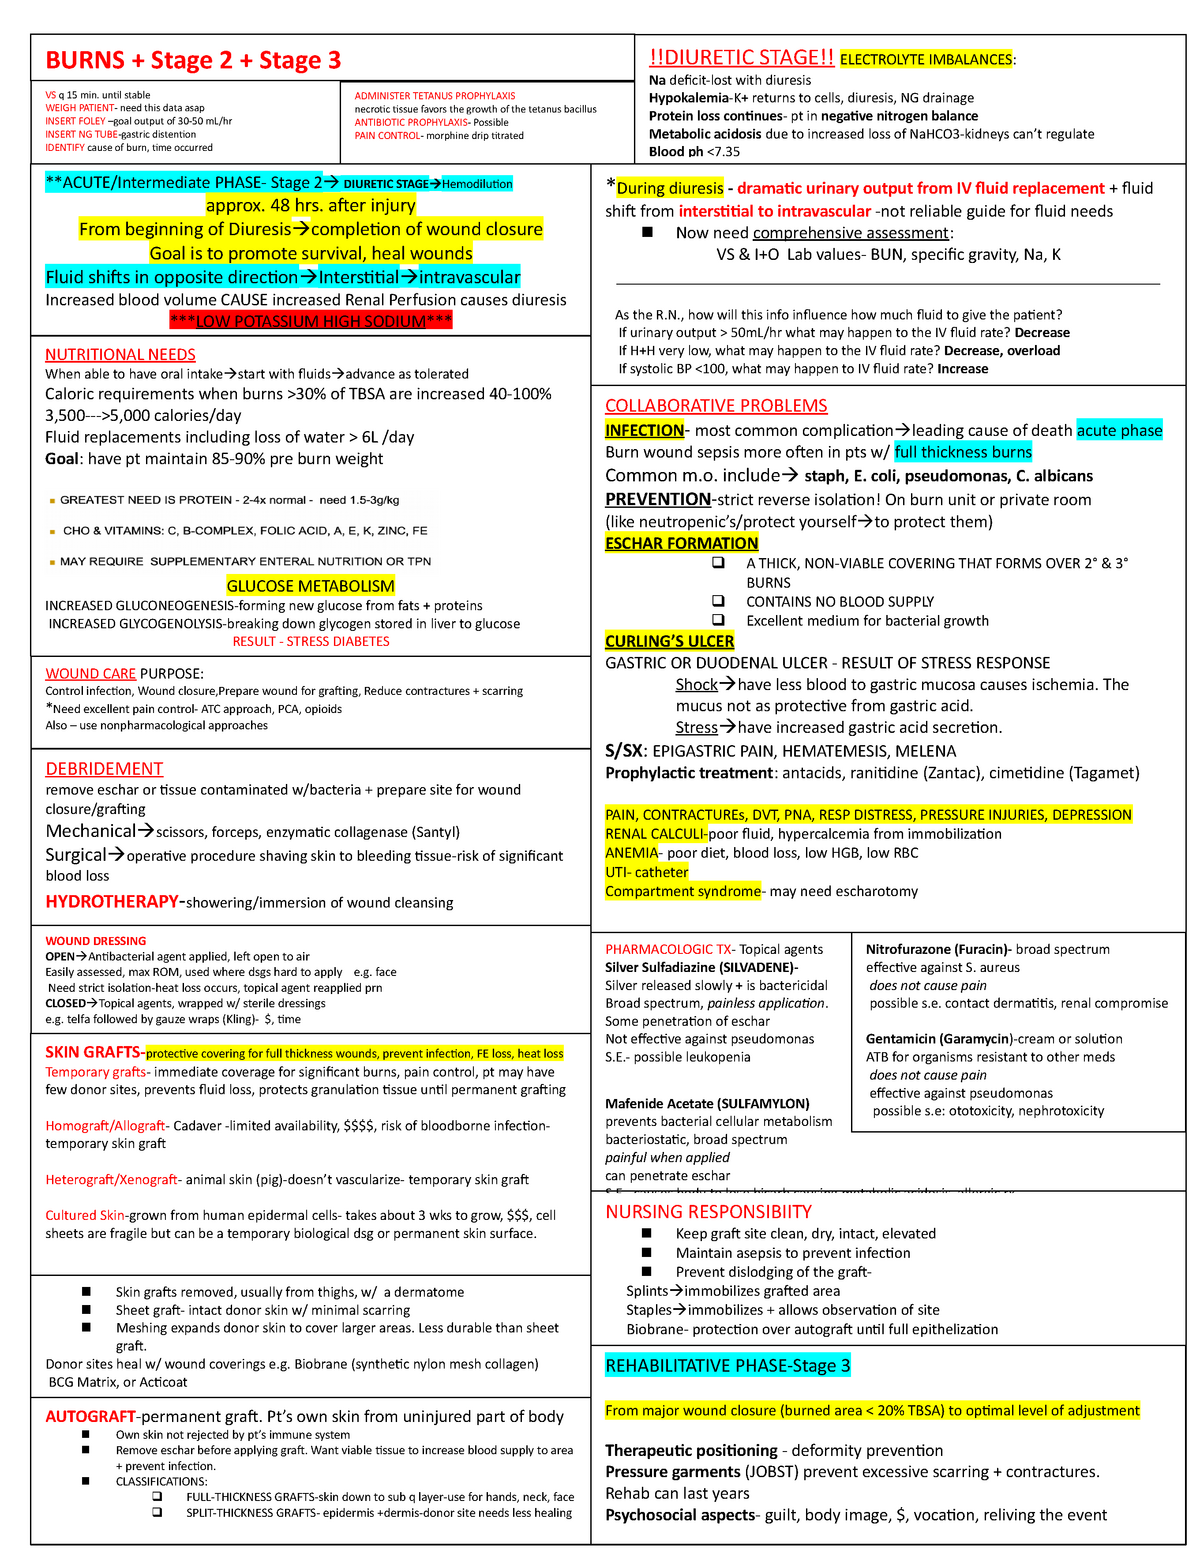 Studyguide - 2+ 3 burn study guide - SKIN GRAFTS- protective covering ...